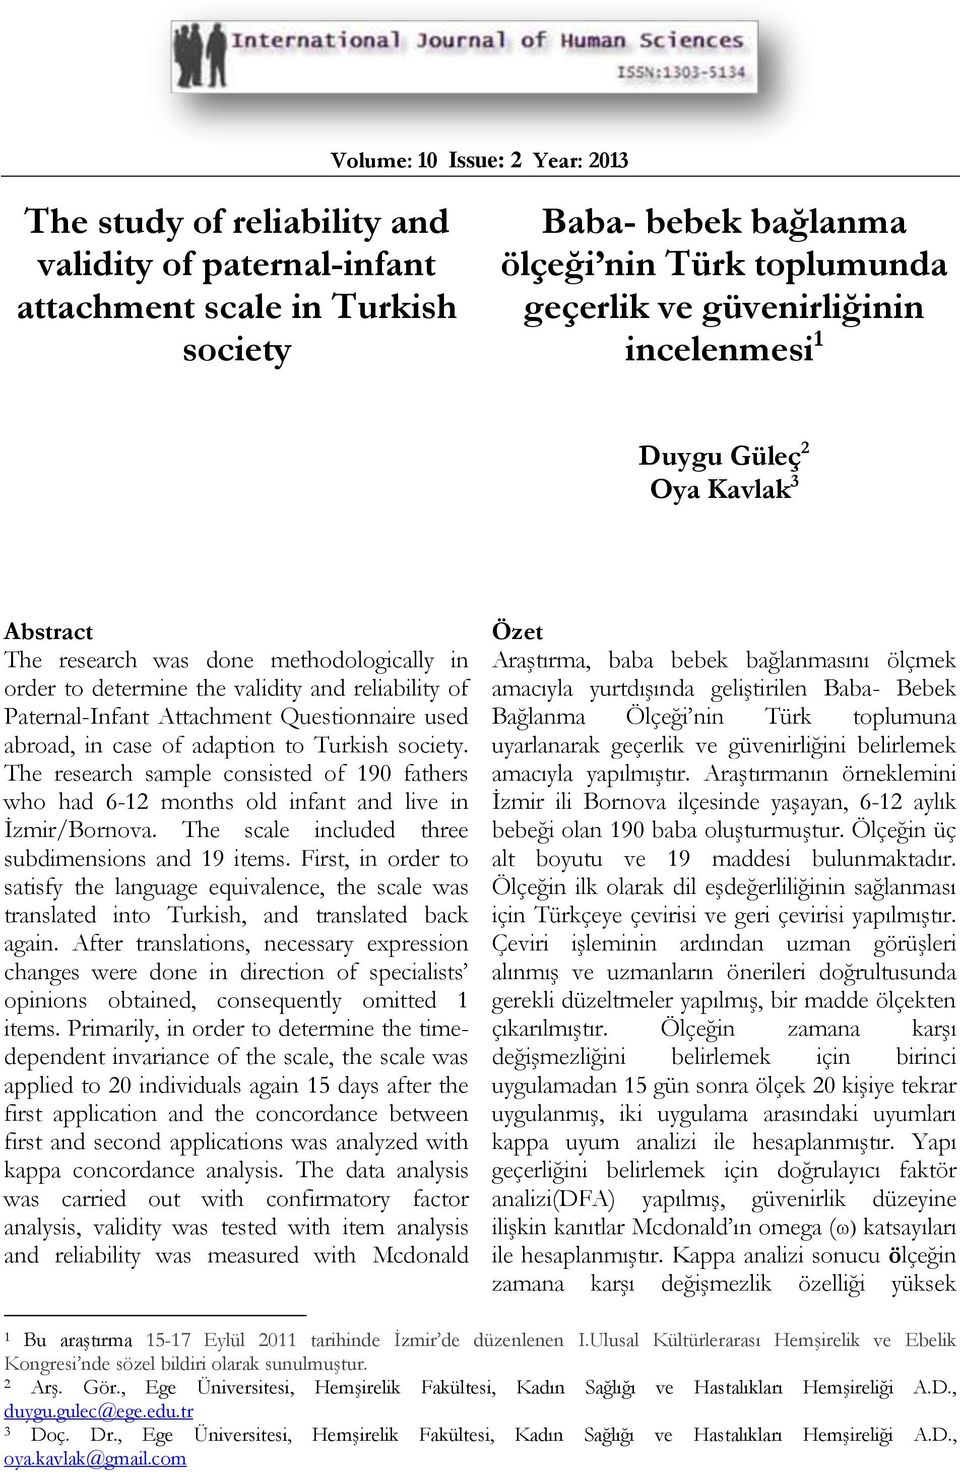 case of adaption to Turkish society. The research sample consisted of 190 fathers who had 6-12 months old infant and live in İzmir/Bornova. The scale included three subdimensions and 19 items.